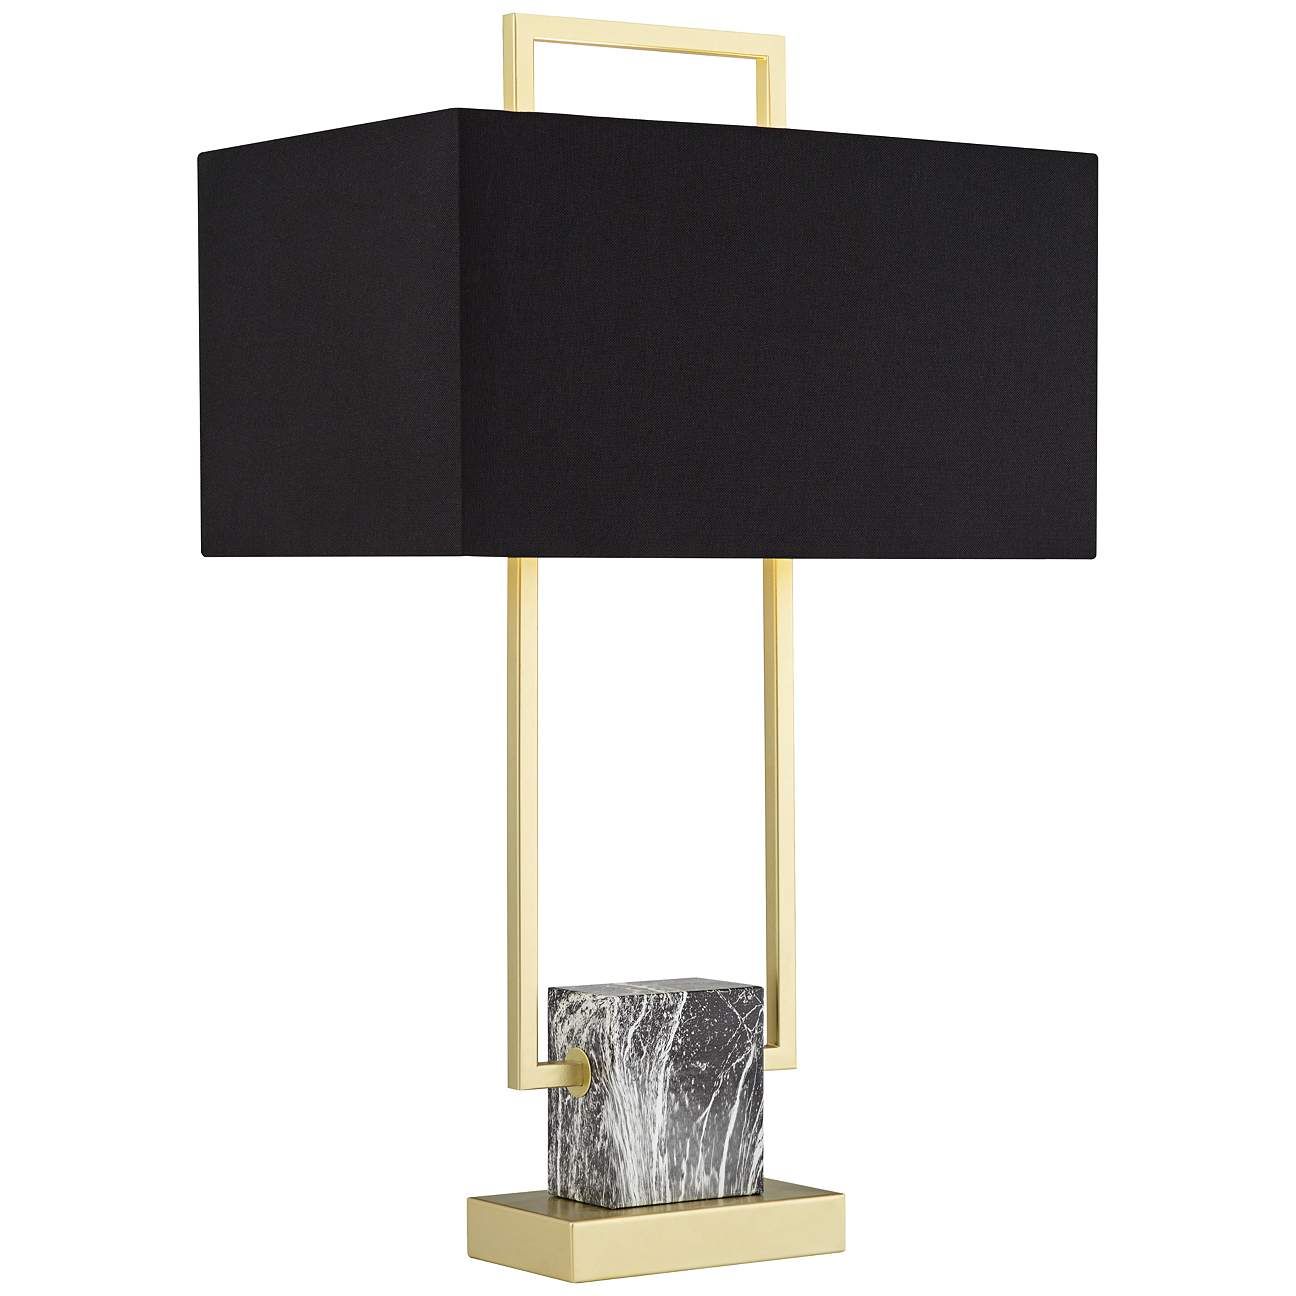 Carl Gold Table Lamp with Black Rectangle Shade | Lamps Plus